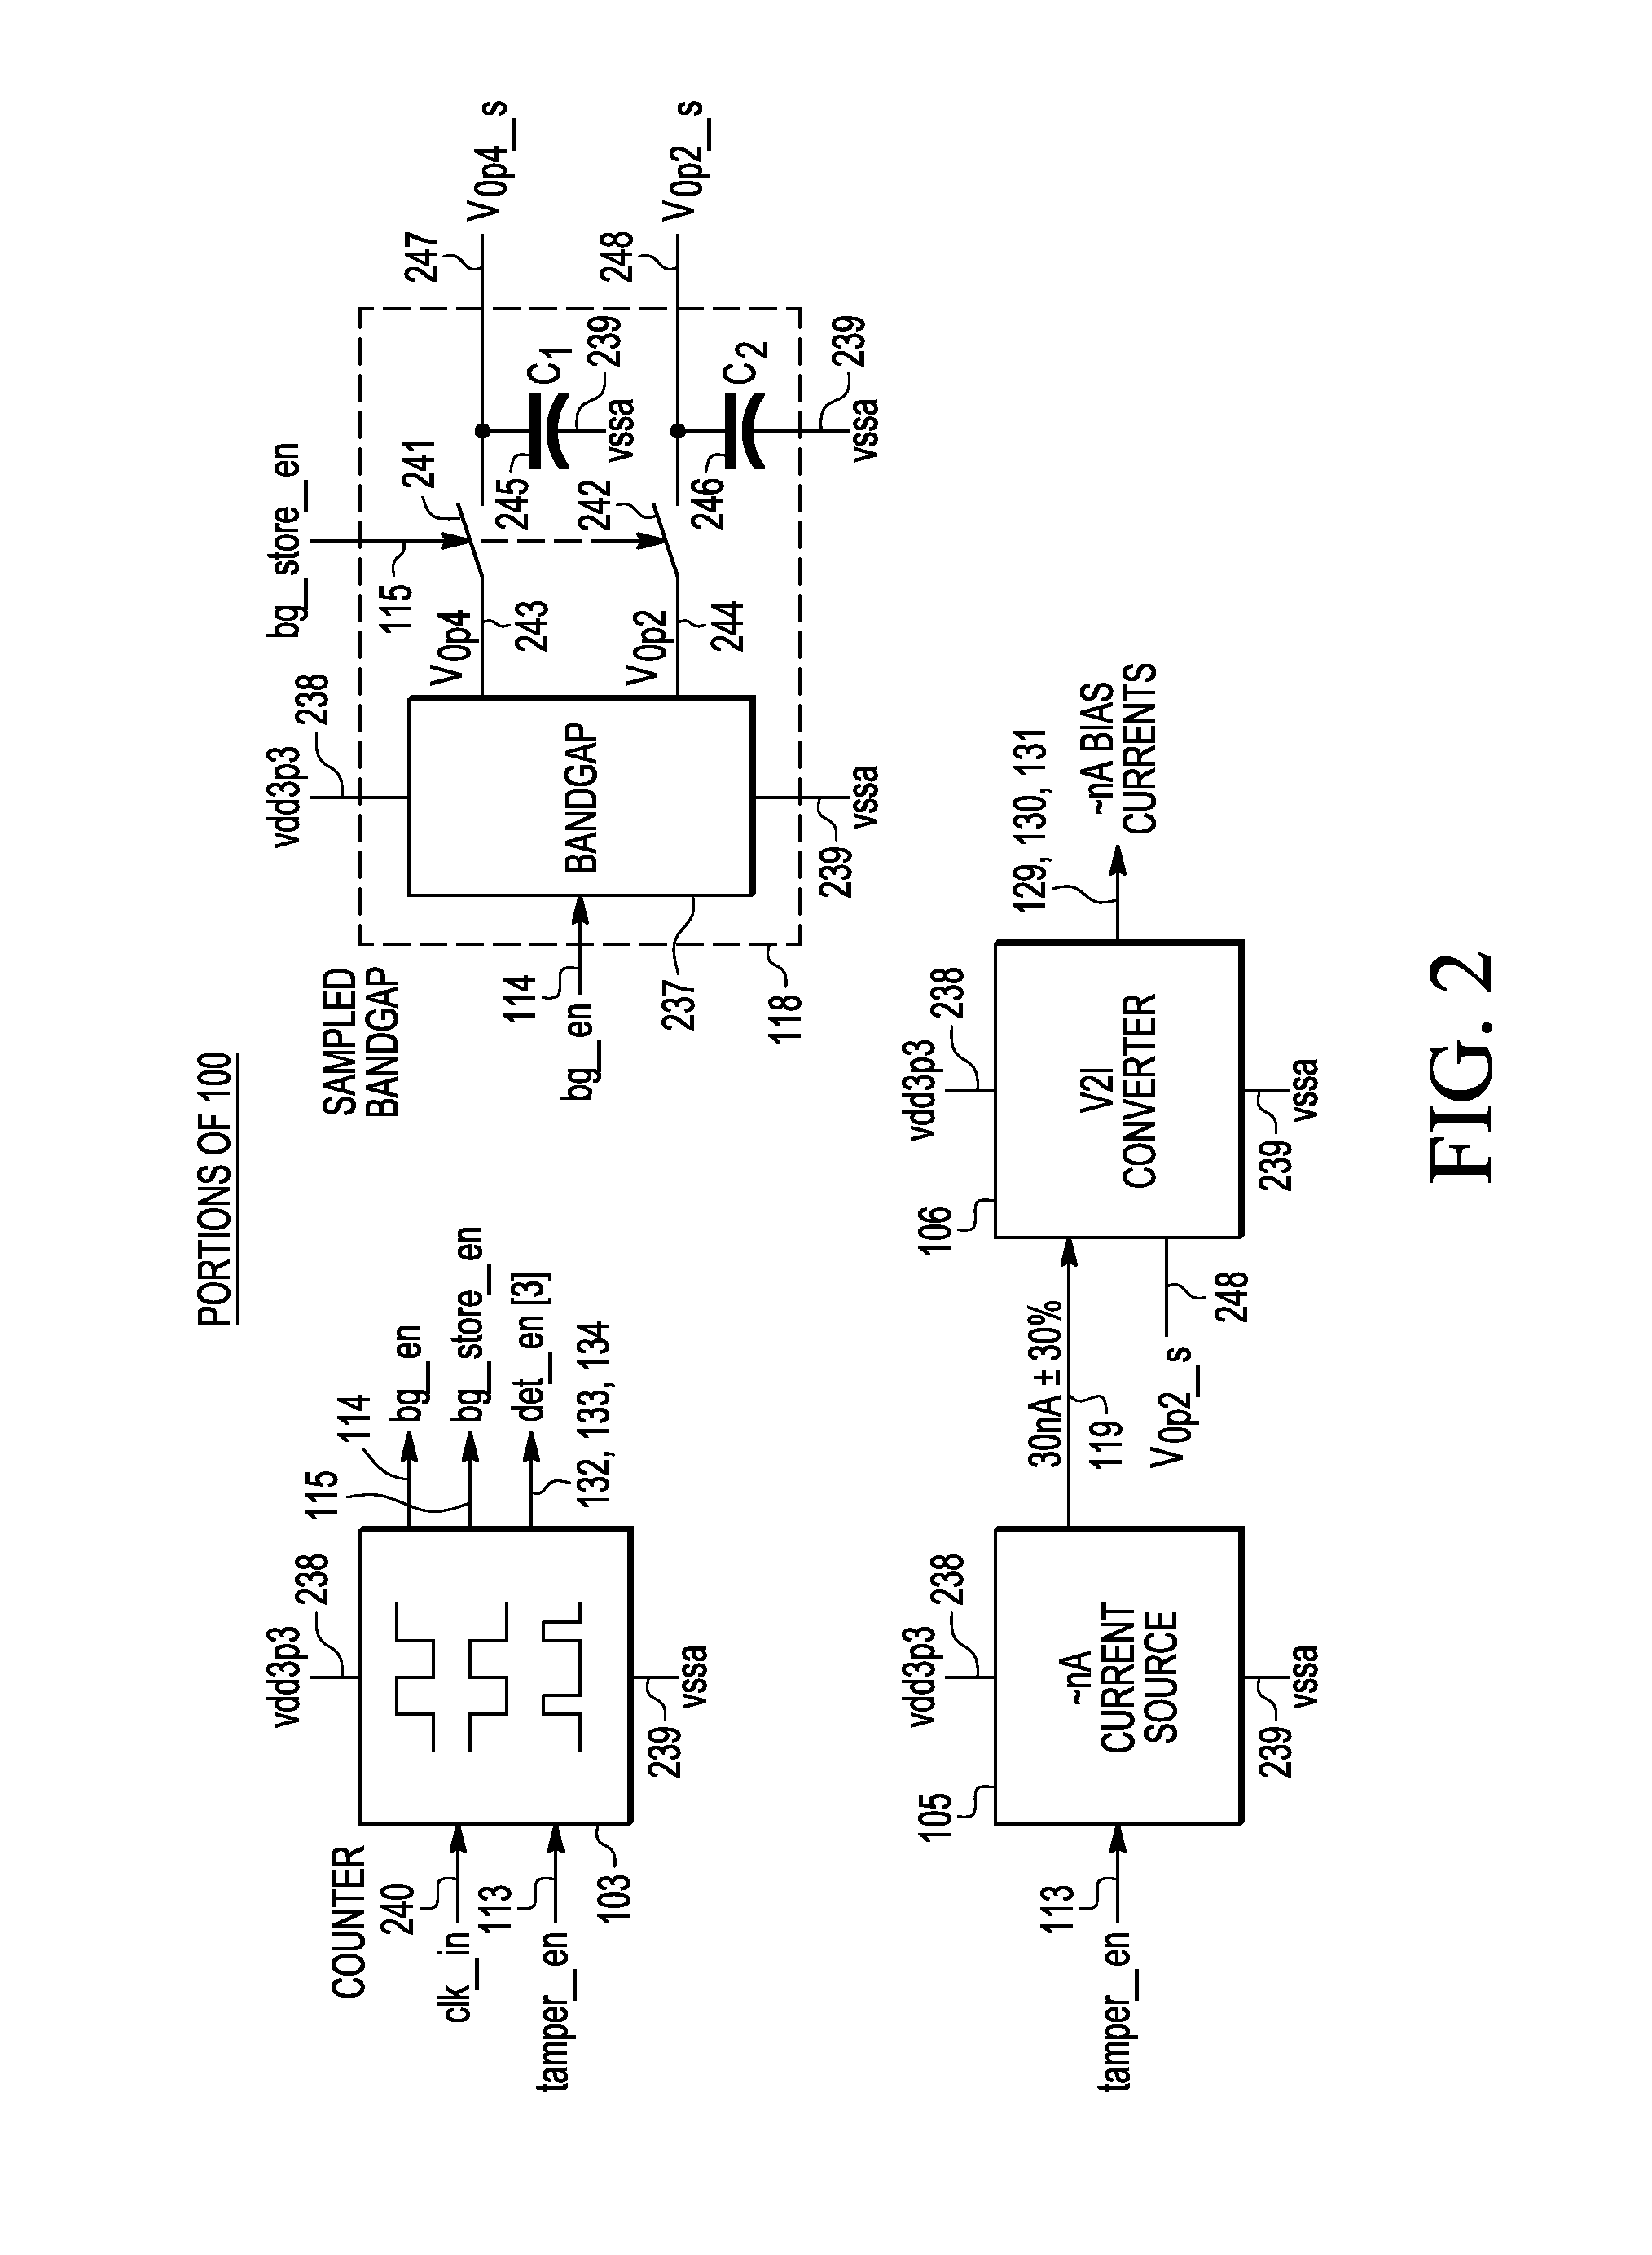 Method and apparatus for limiting access to an integrated circuit (IC)